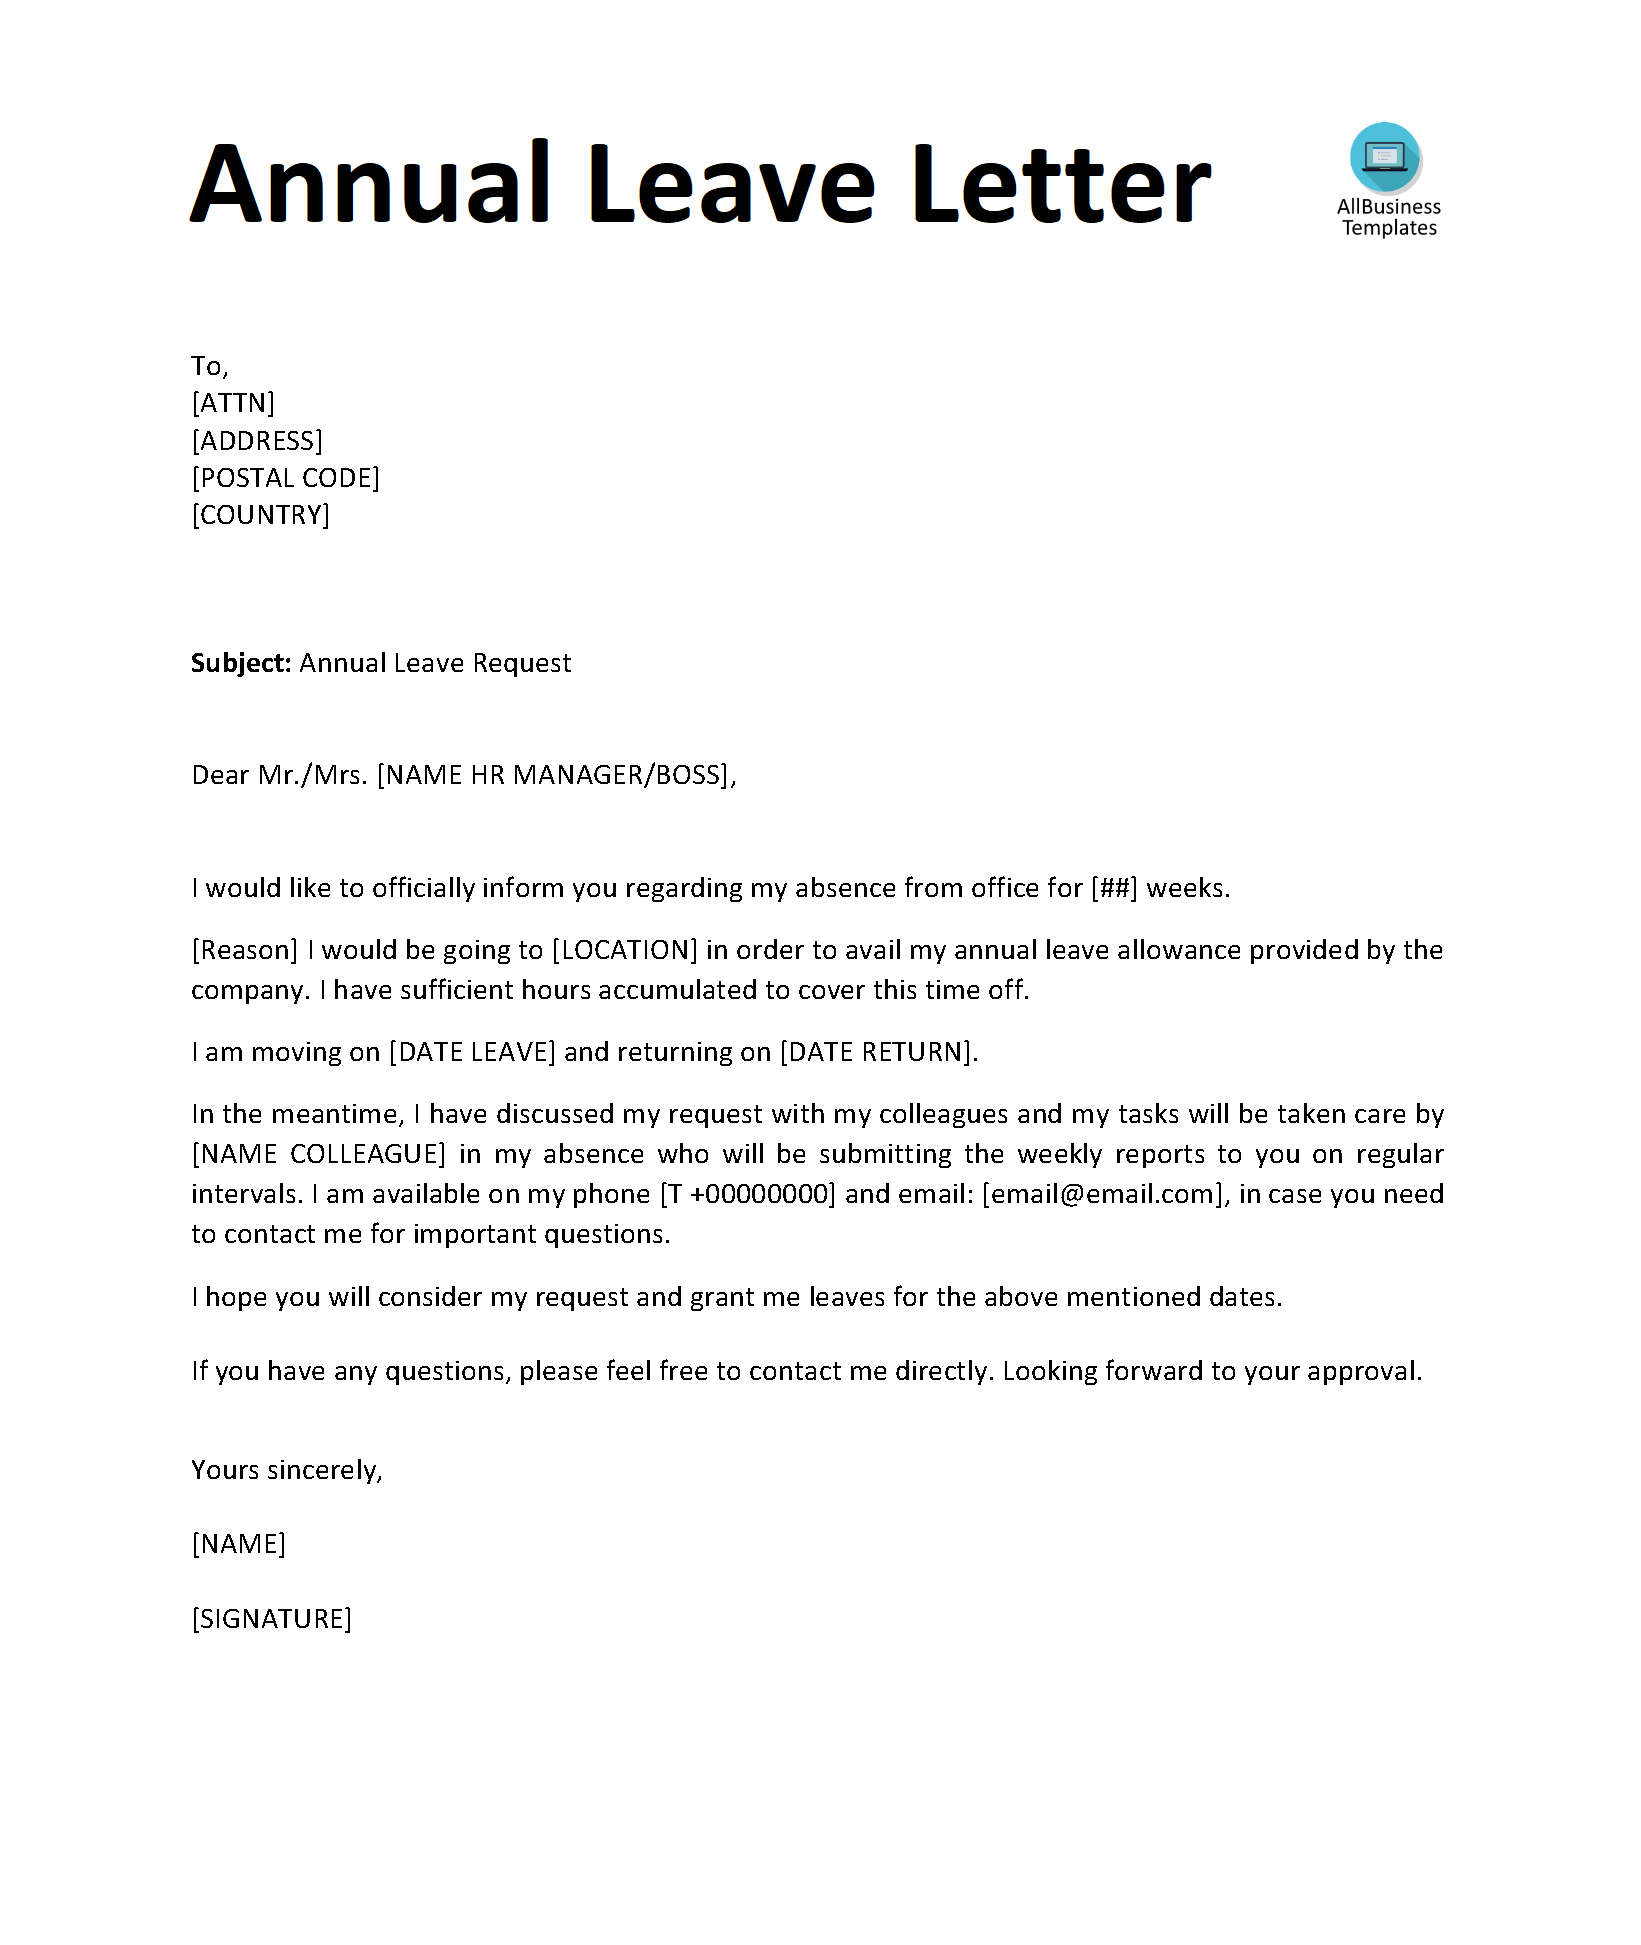 application letter for annual leave